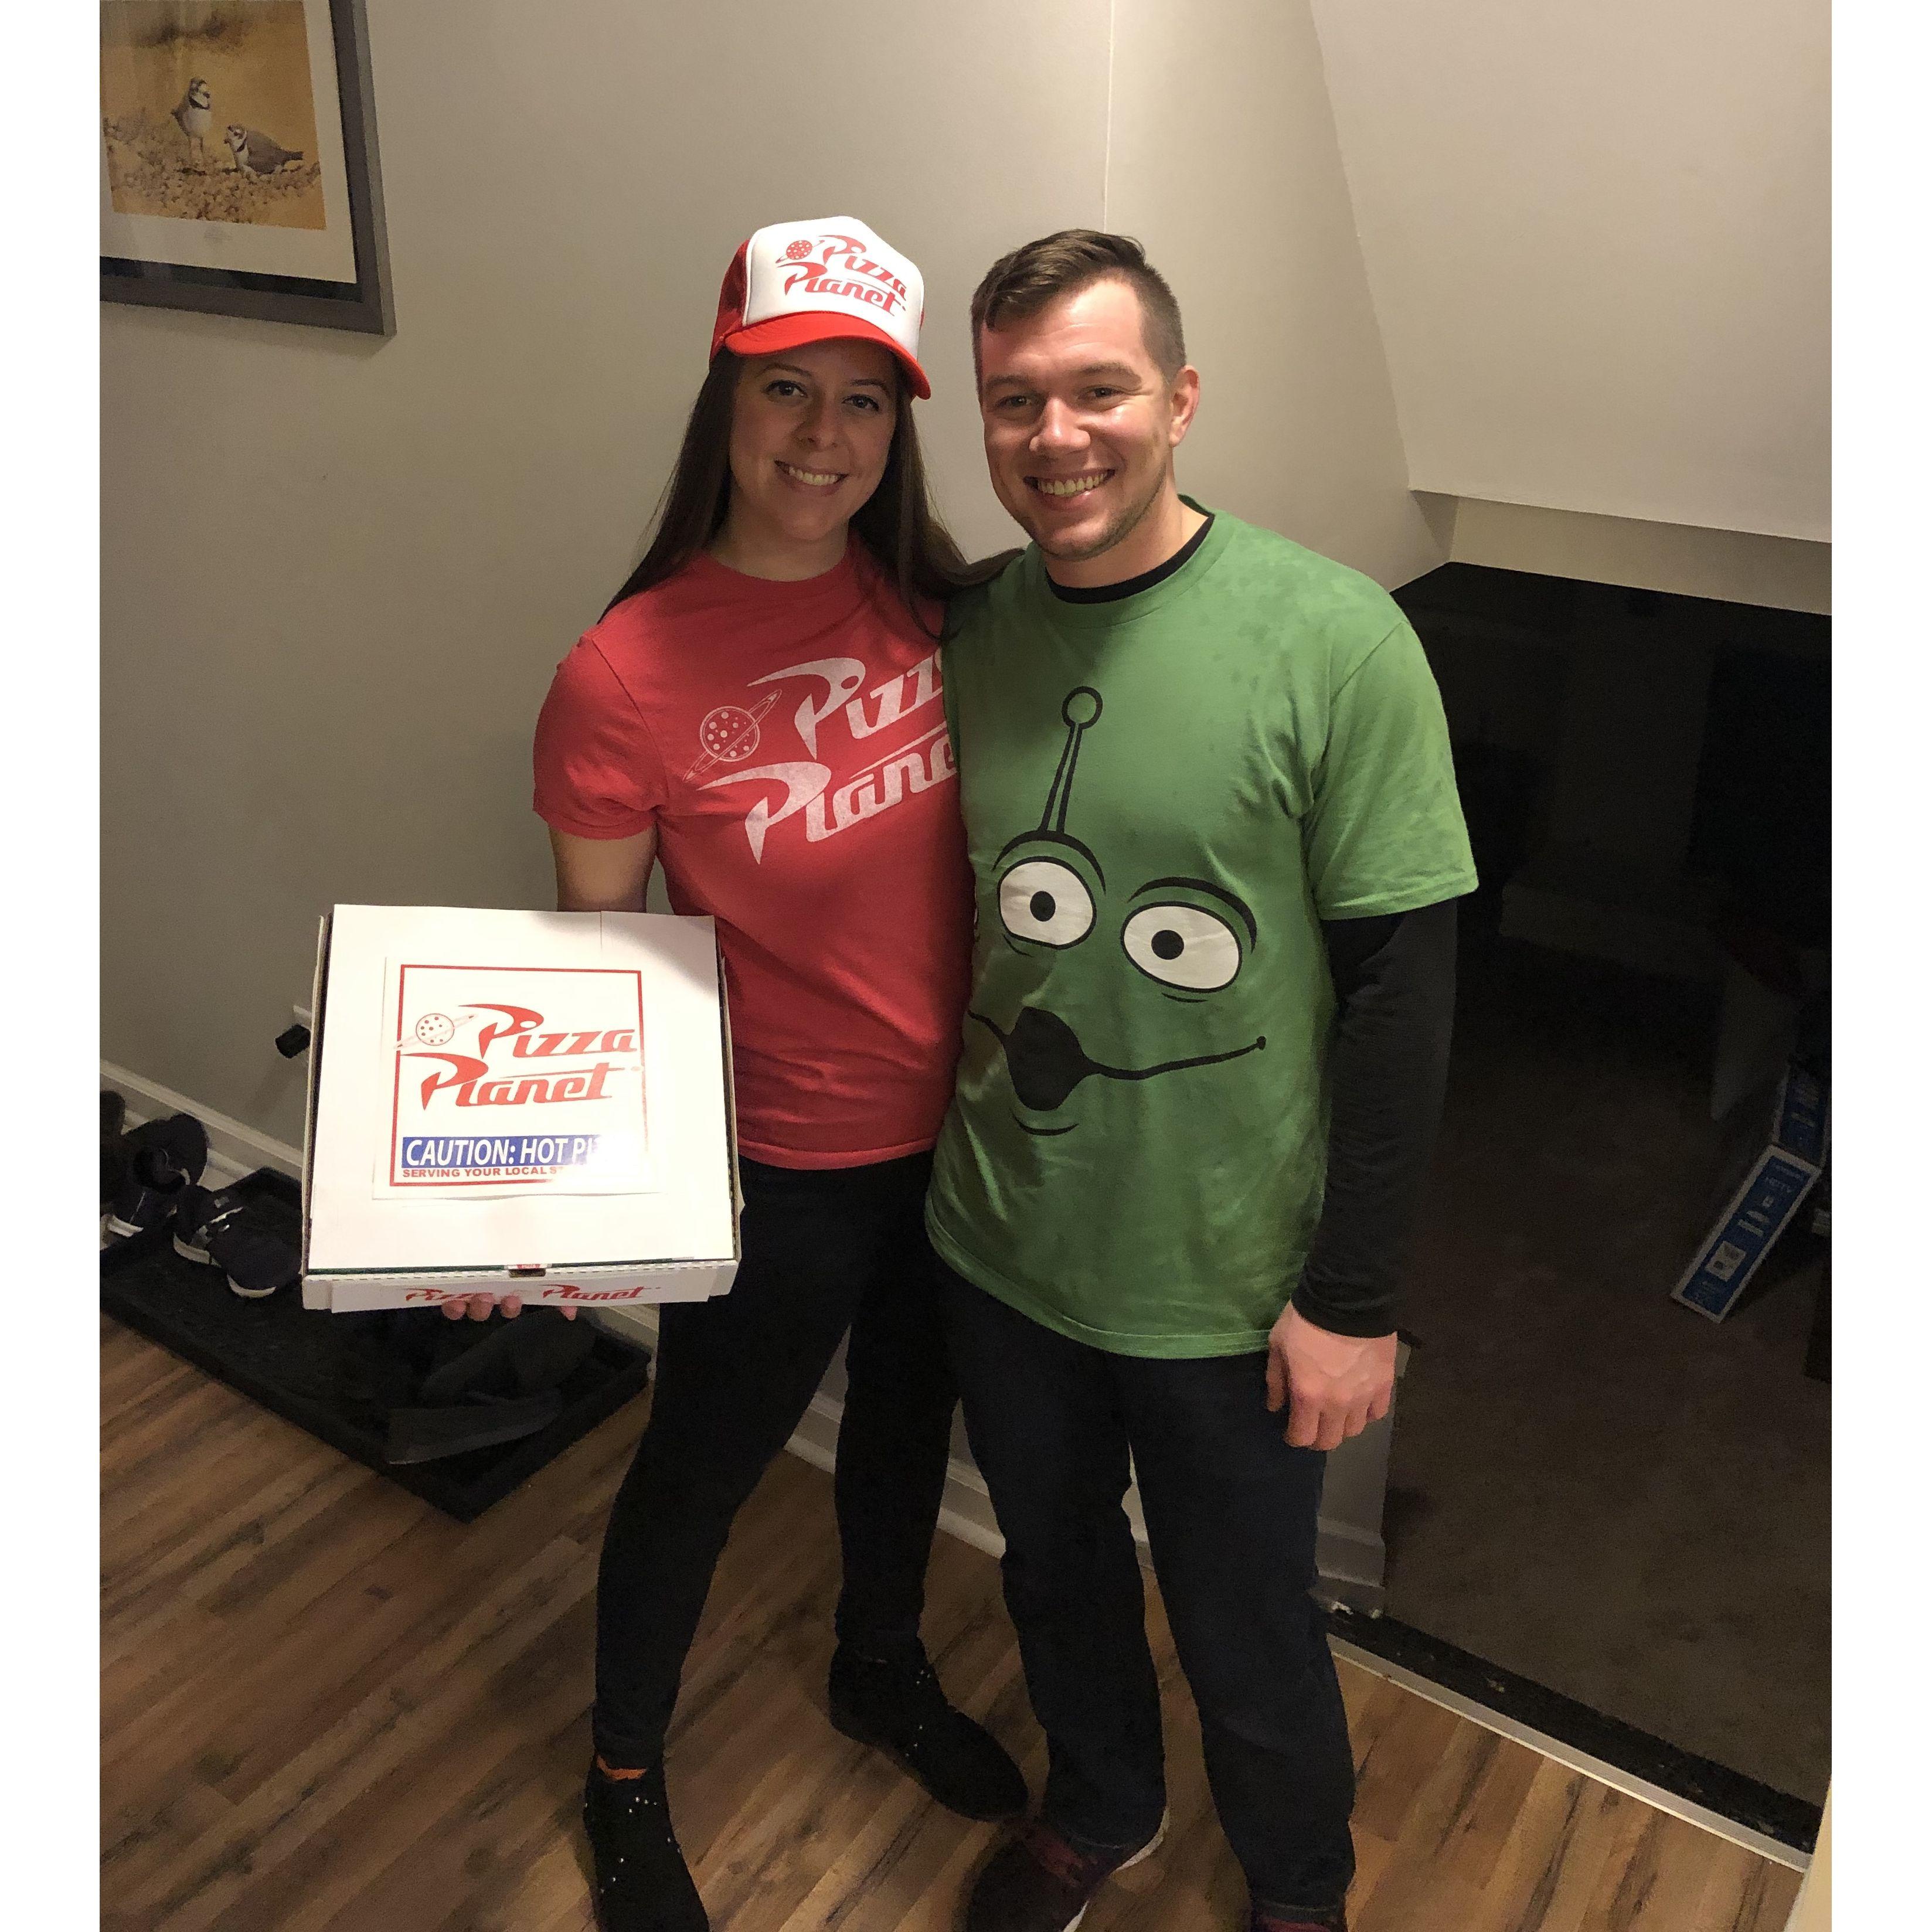 Our 1st Halloween together! Pizza Planet and an Alien from Toy Story! (2019)